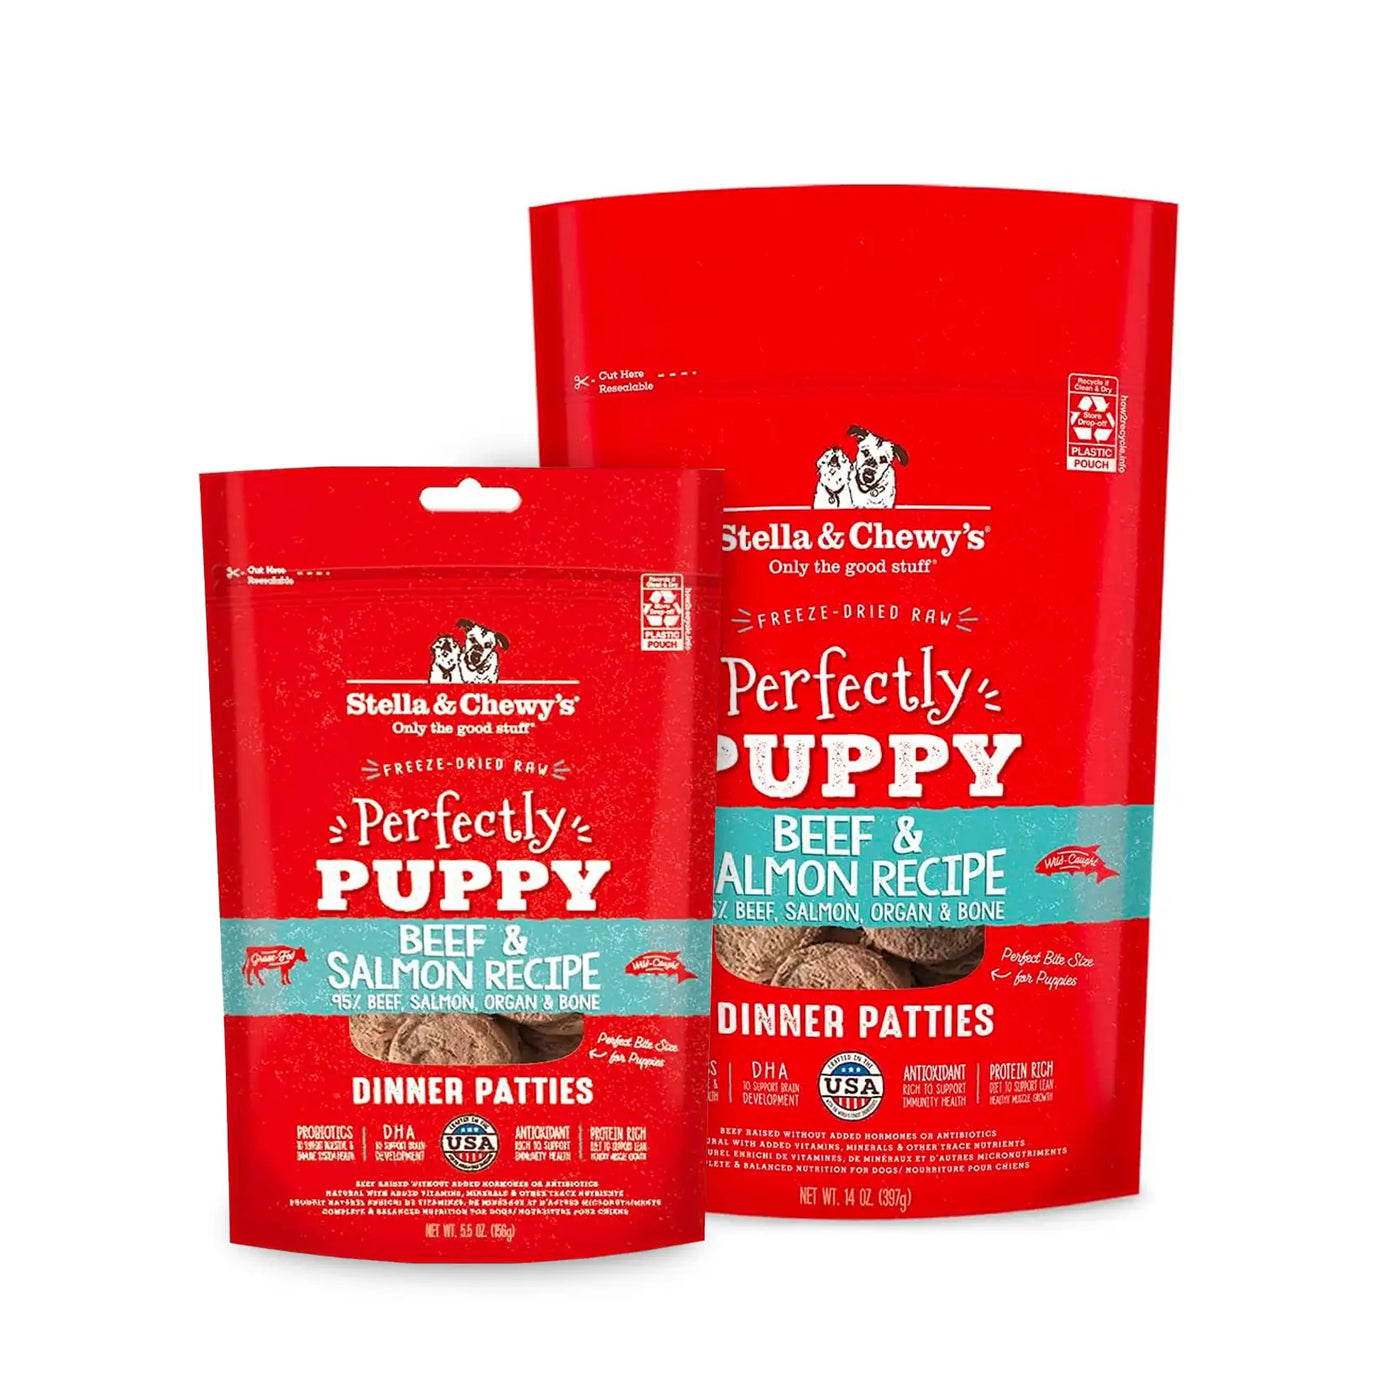 Stella & Chewy's - Freeze Dried Perfectly Puppy Beef & Salmon Dinner Patties